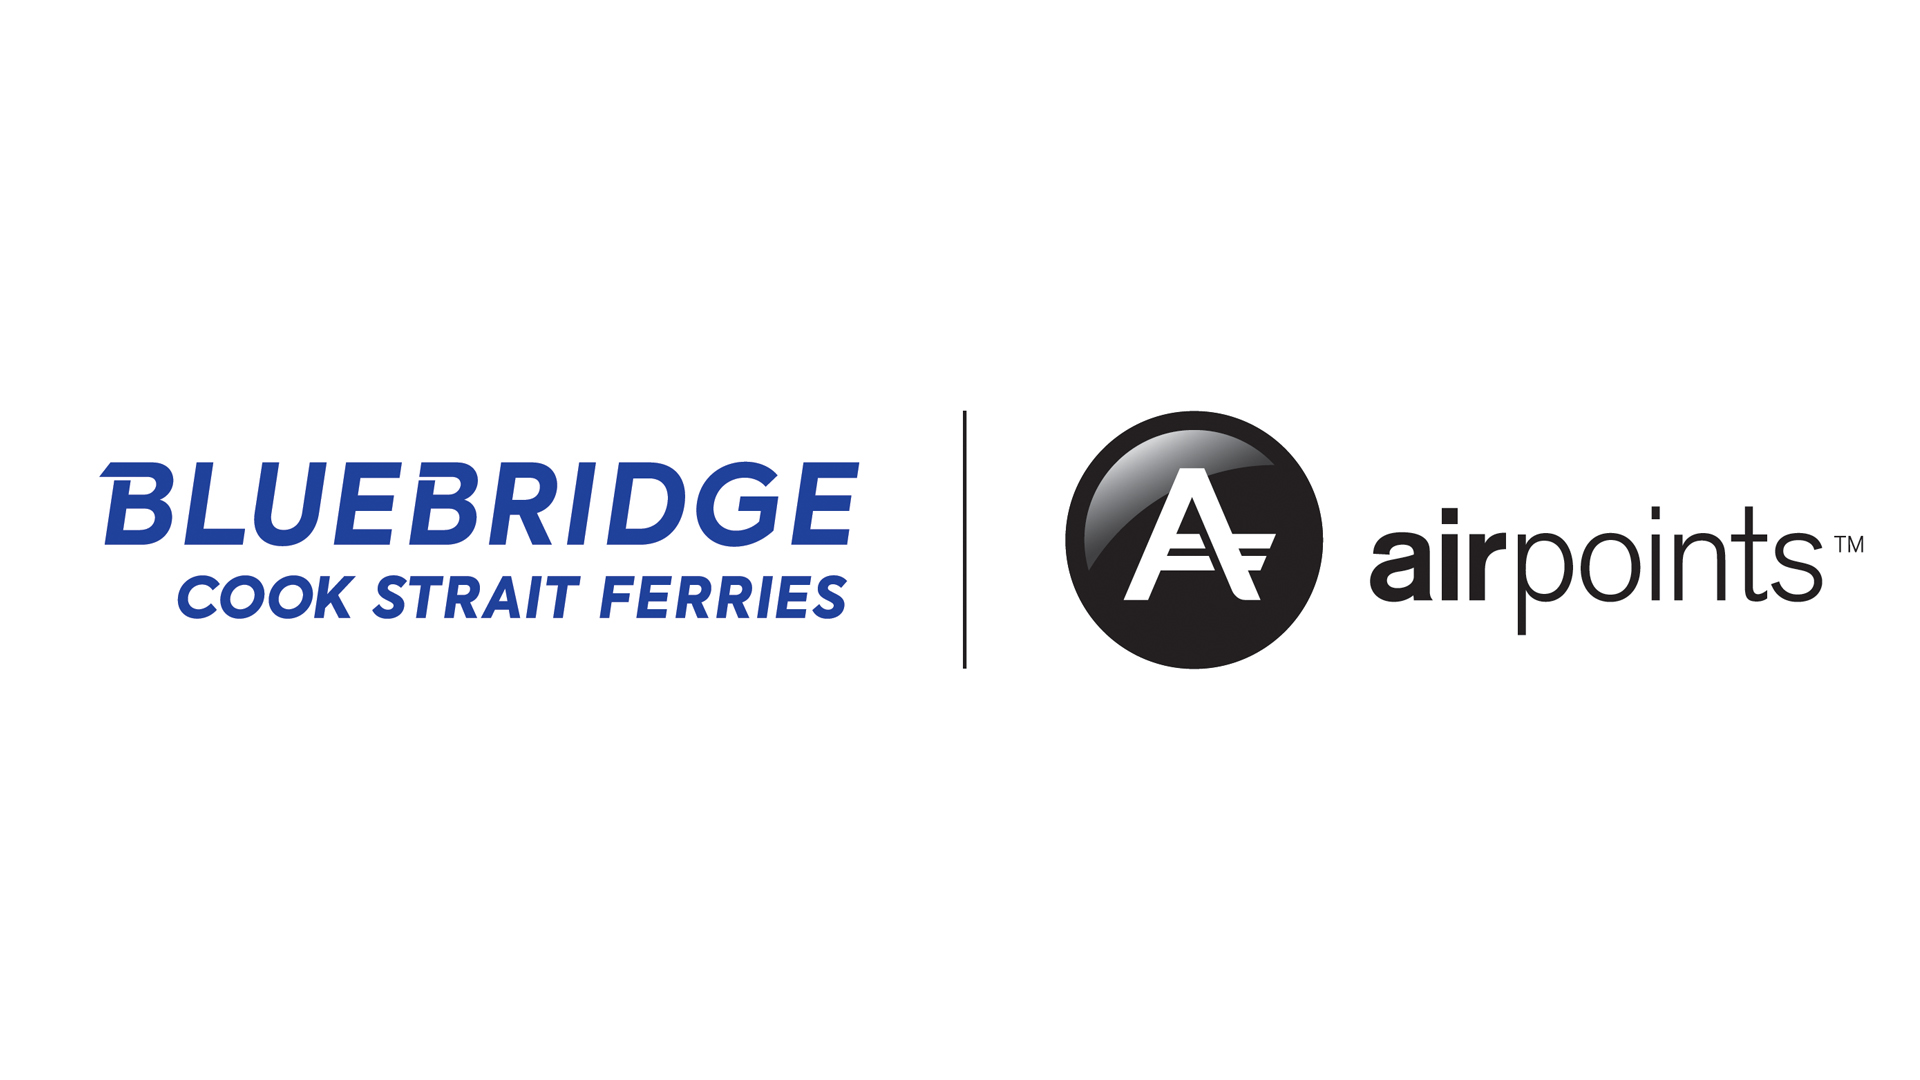 Bluebridge partners with Airpoints